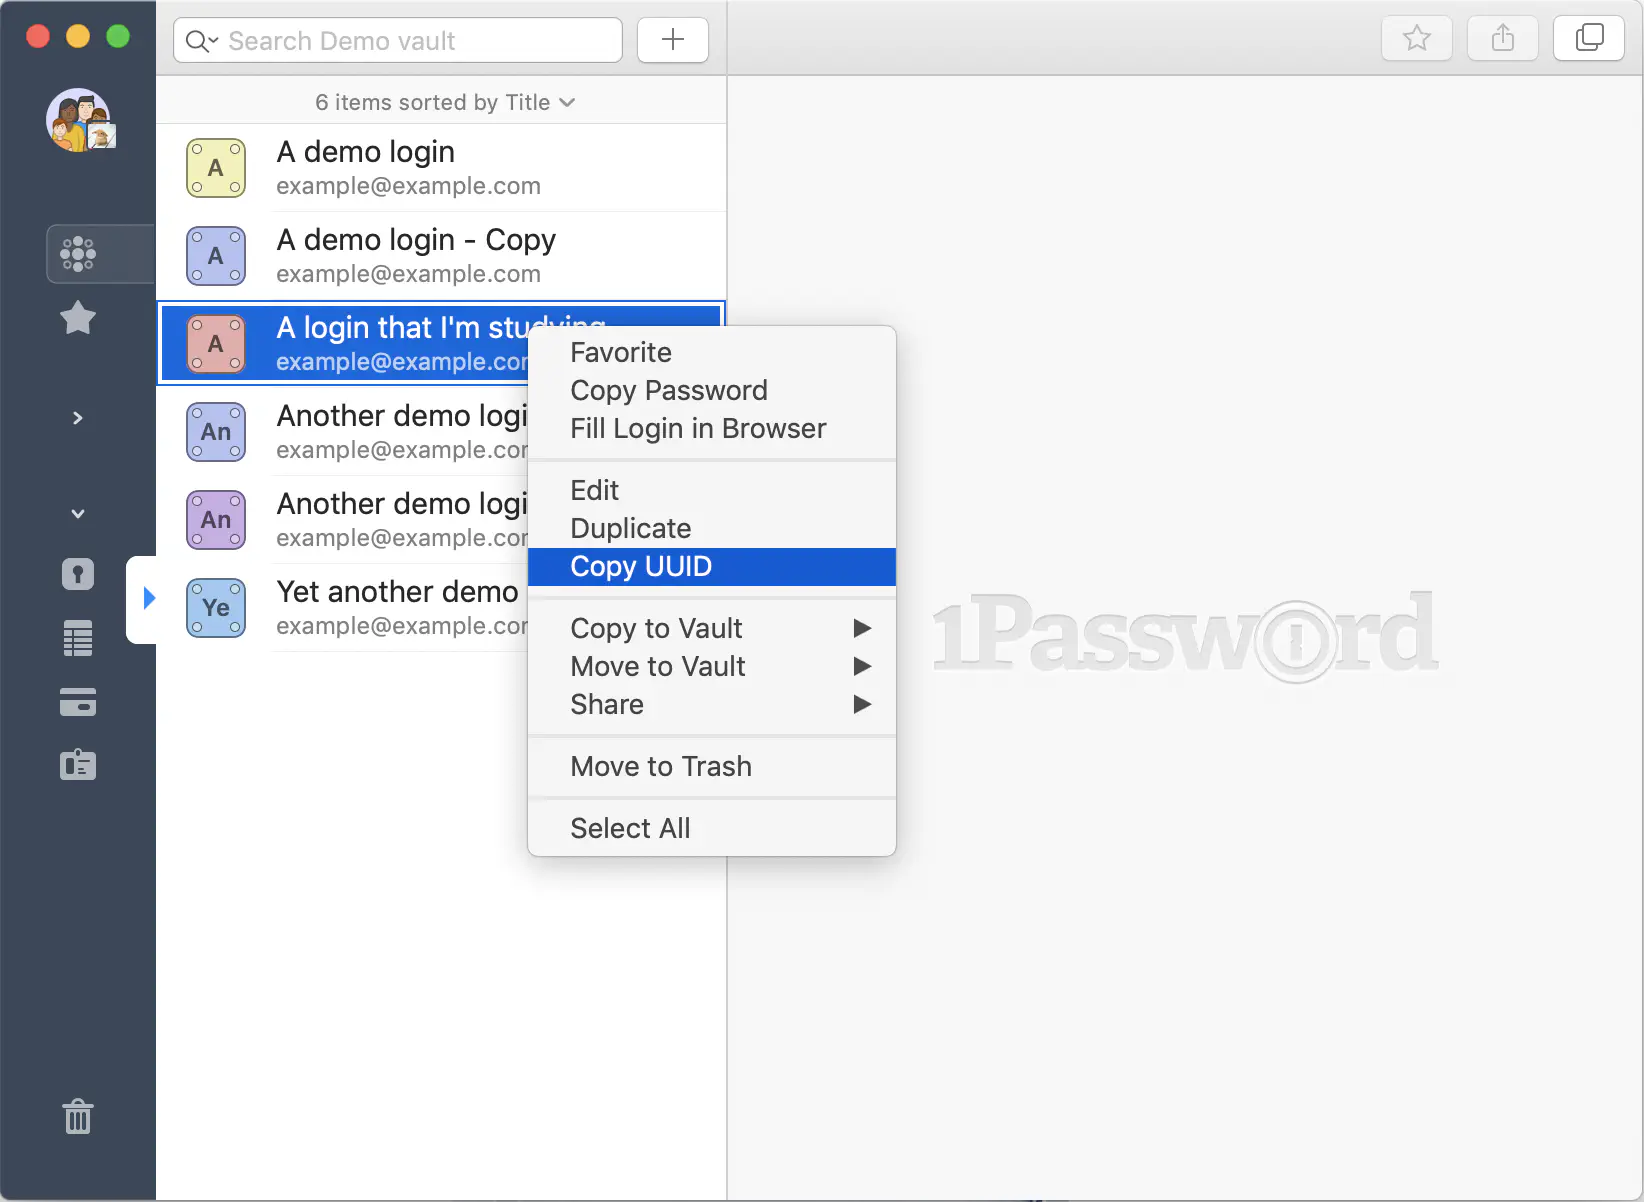 The 1Password context menu for a password with 'Copy UUID' selected